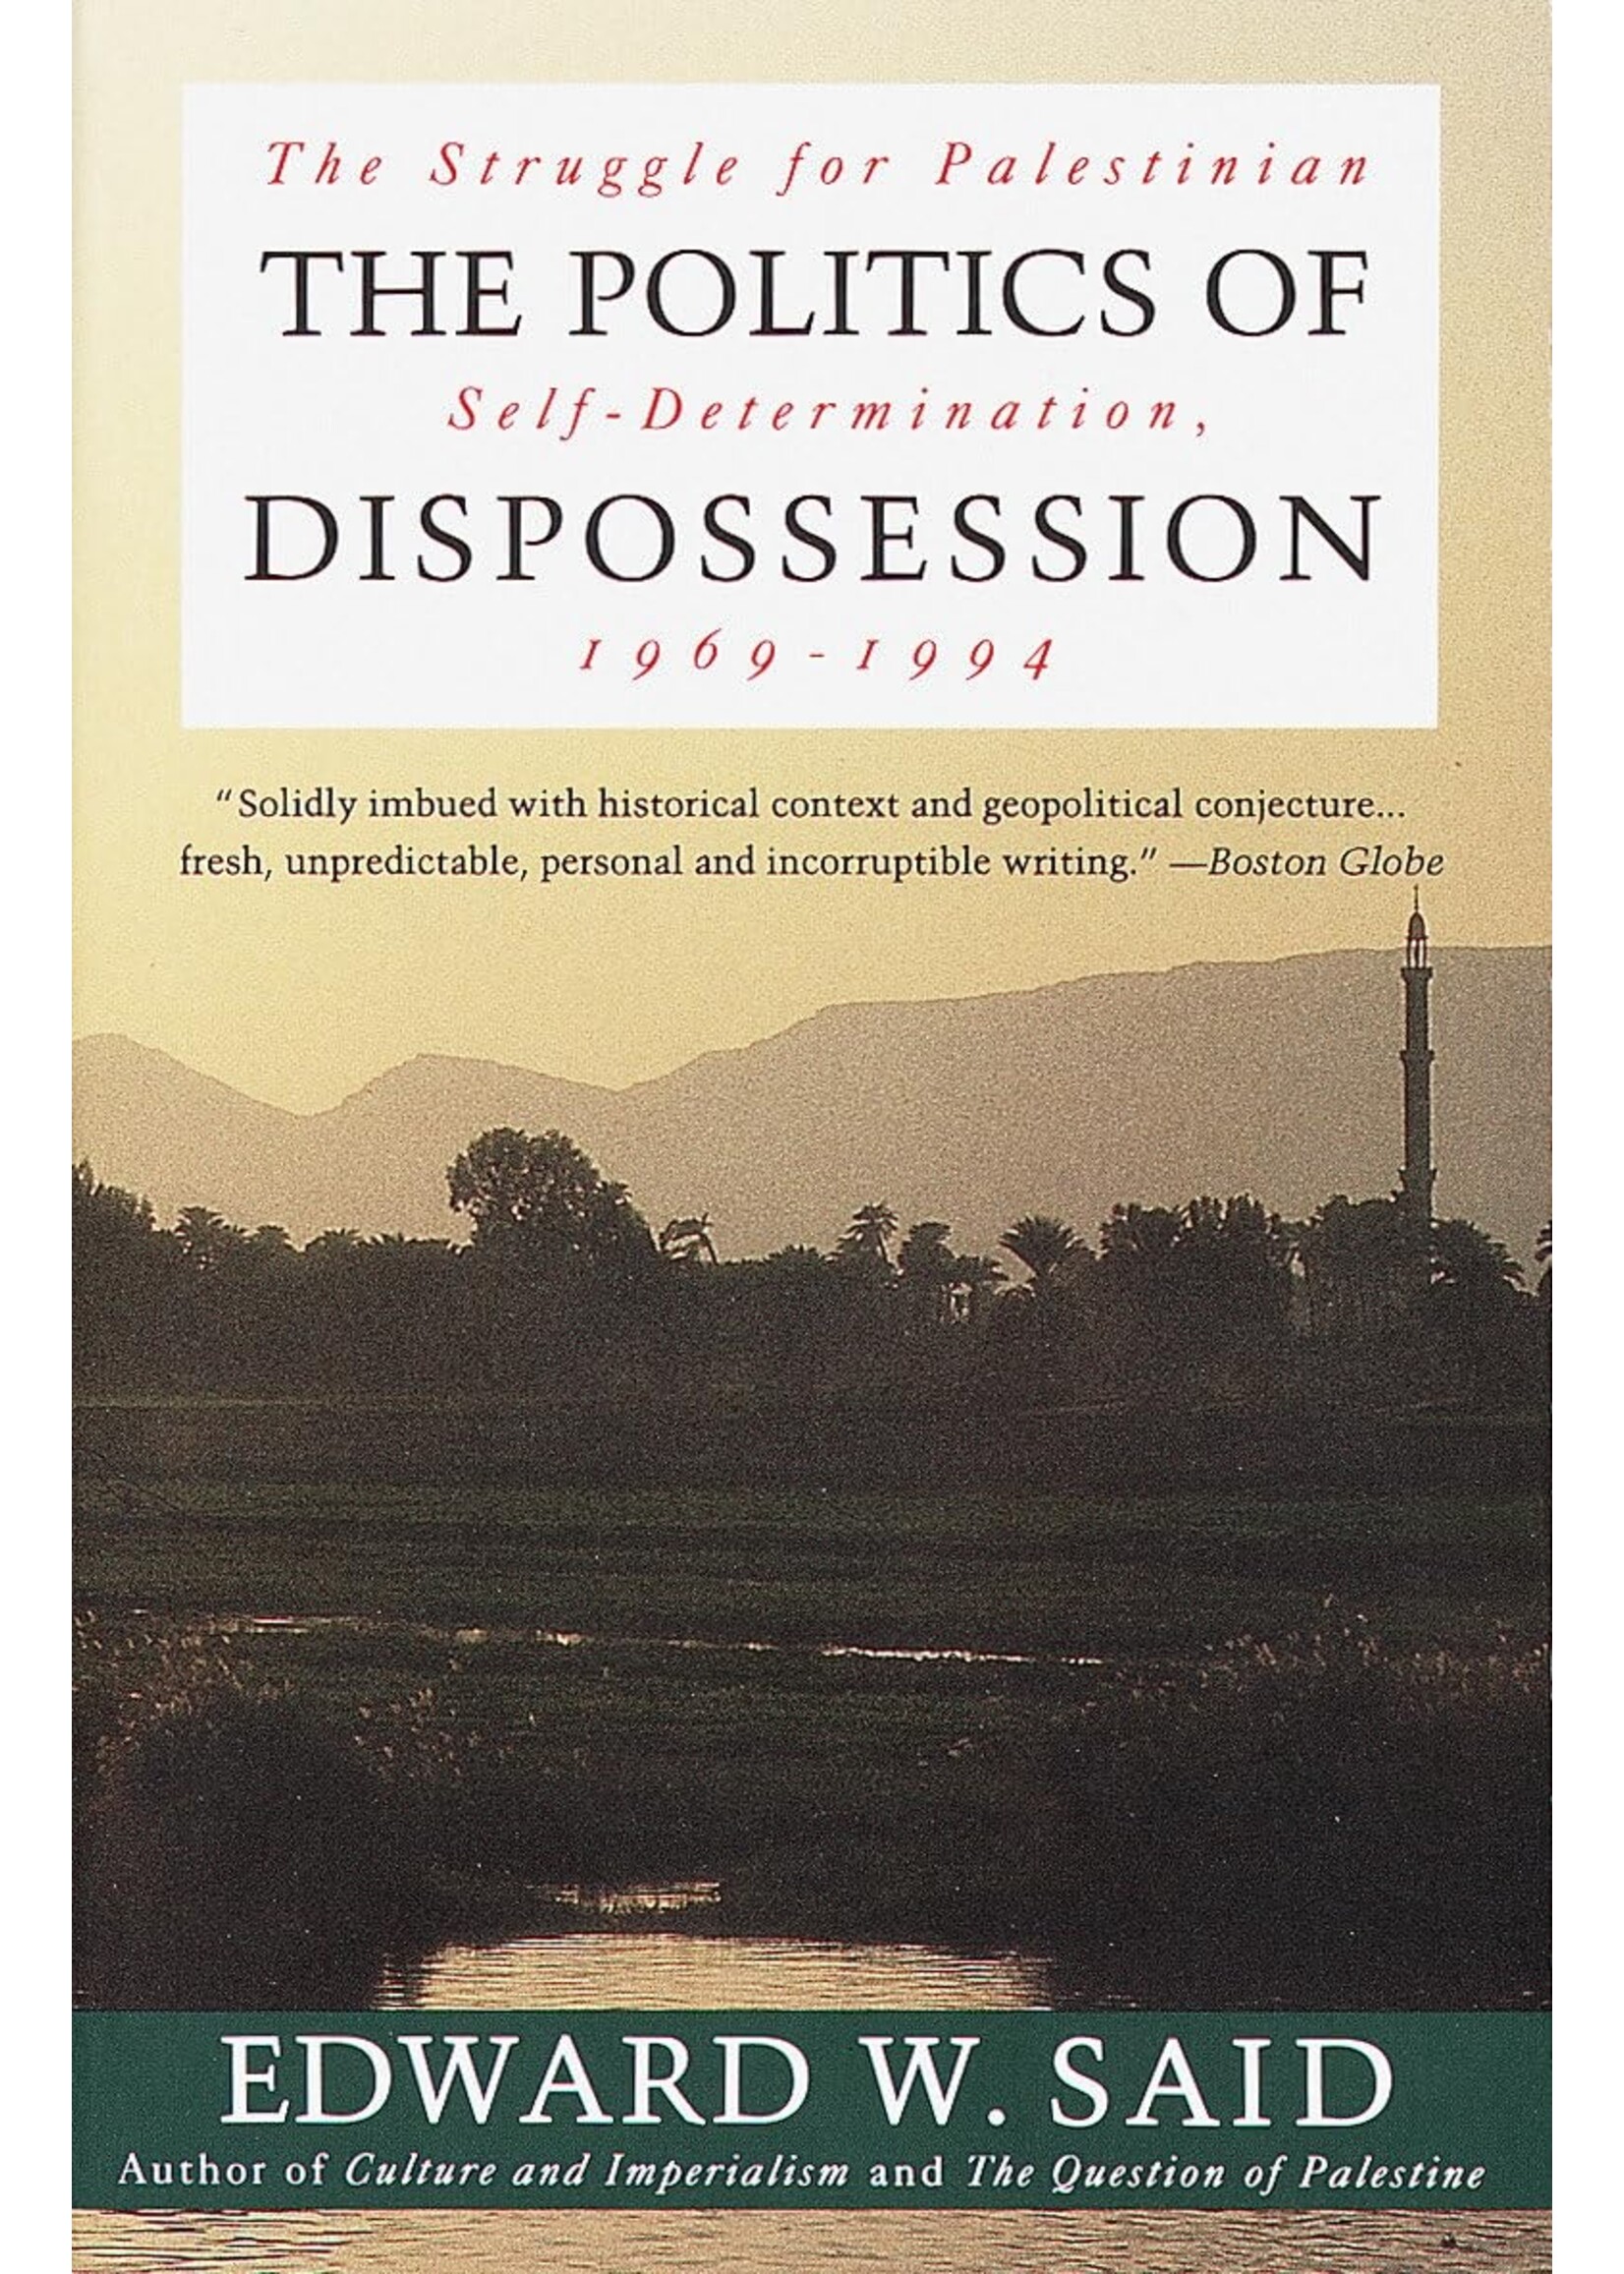 The Politics of Dispossession: The Struggle for Palestinian Self-Determination, 1969-1994